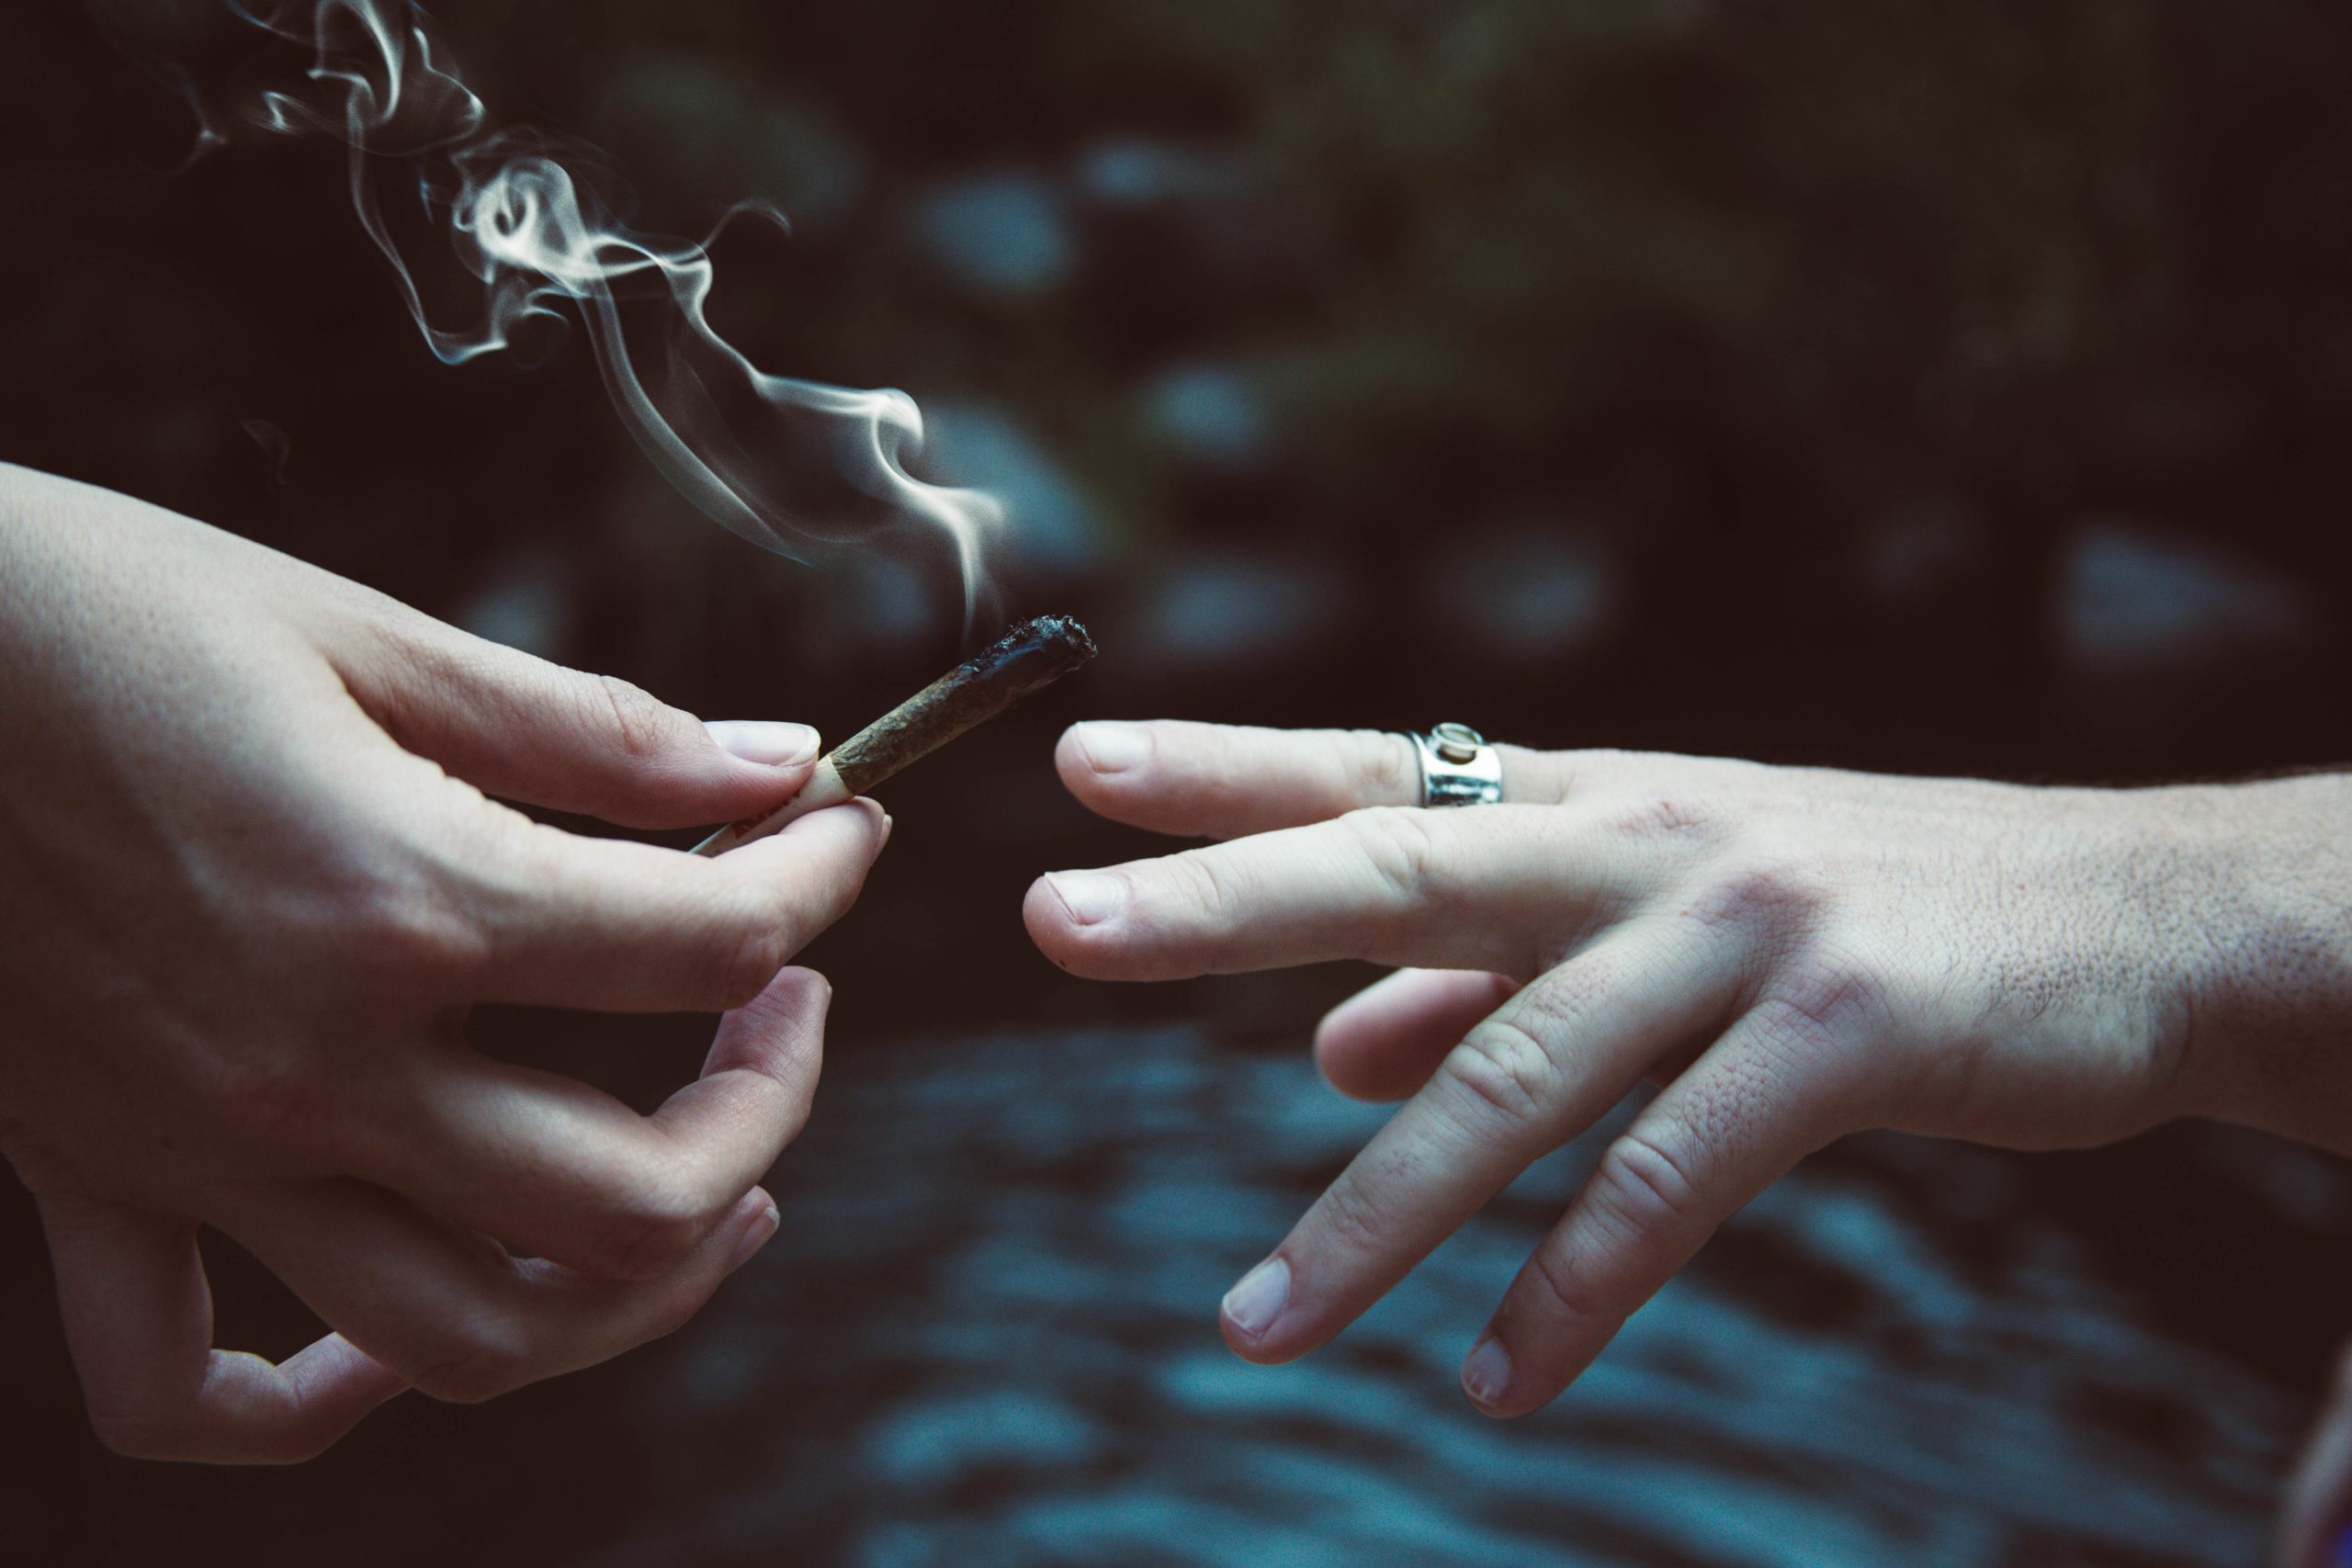 A close-up of two white hands passing a joint from one to another. There is a ring on one of the hands.